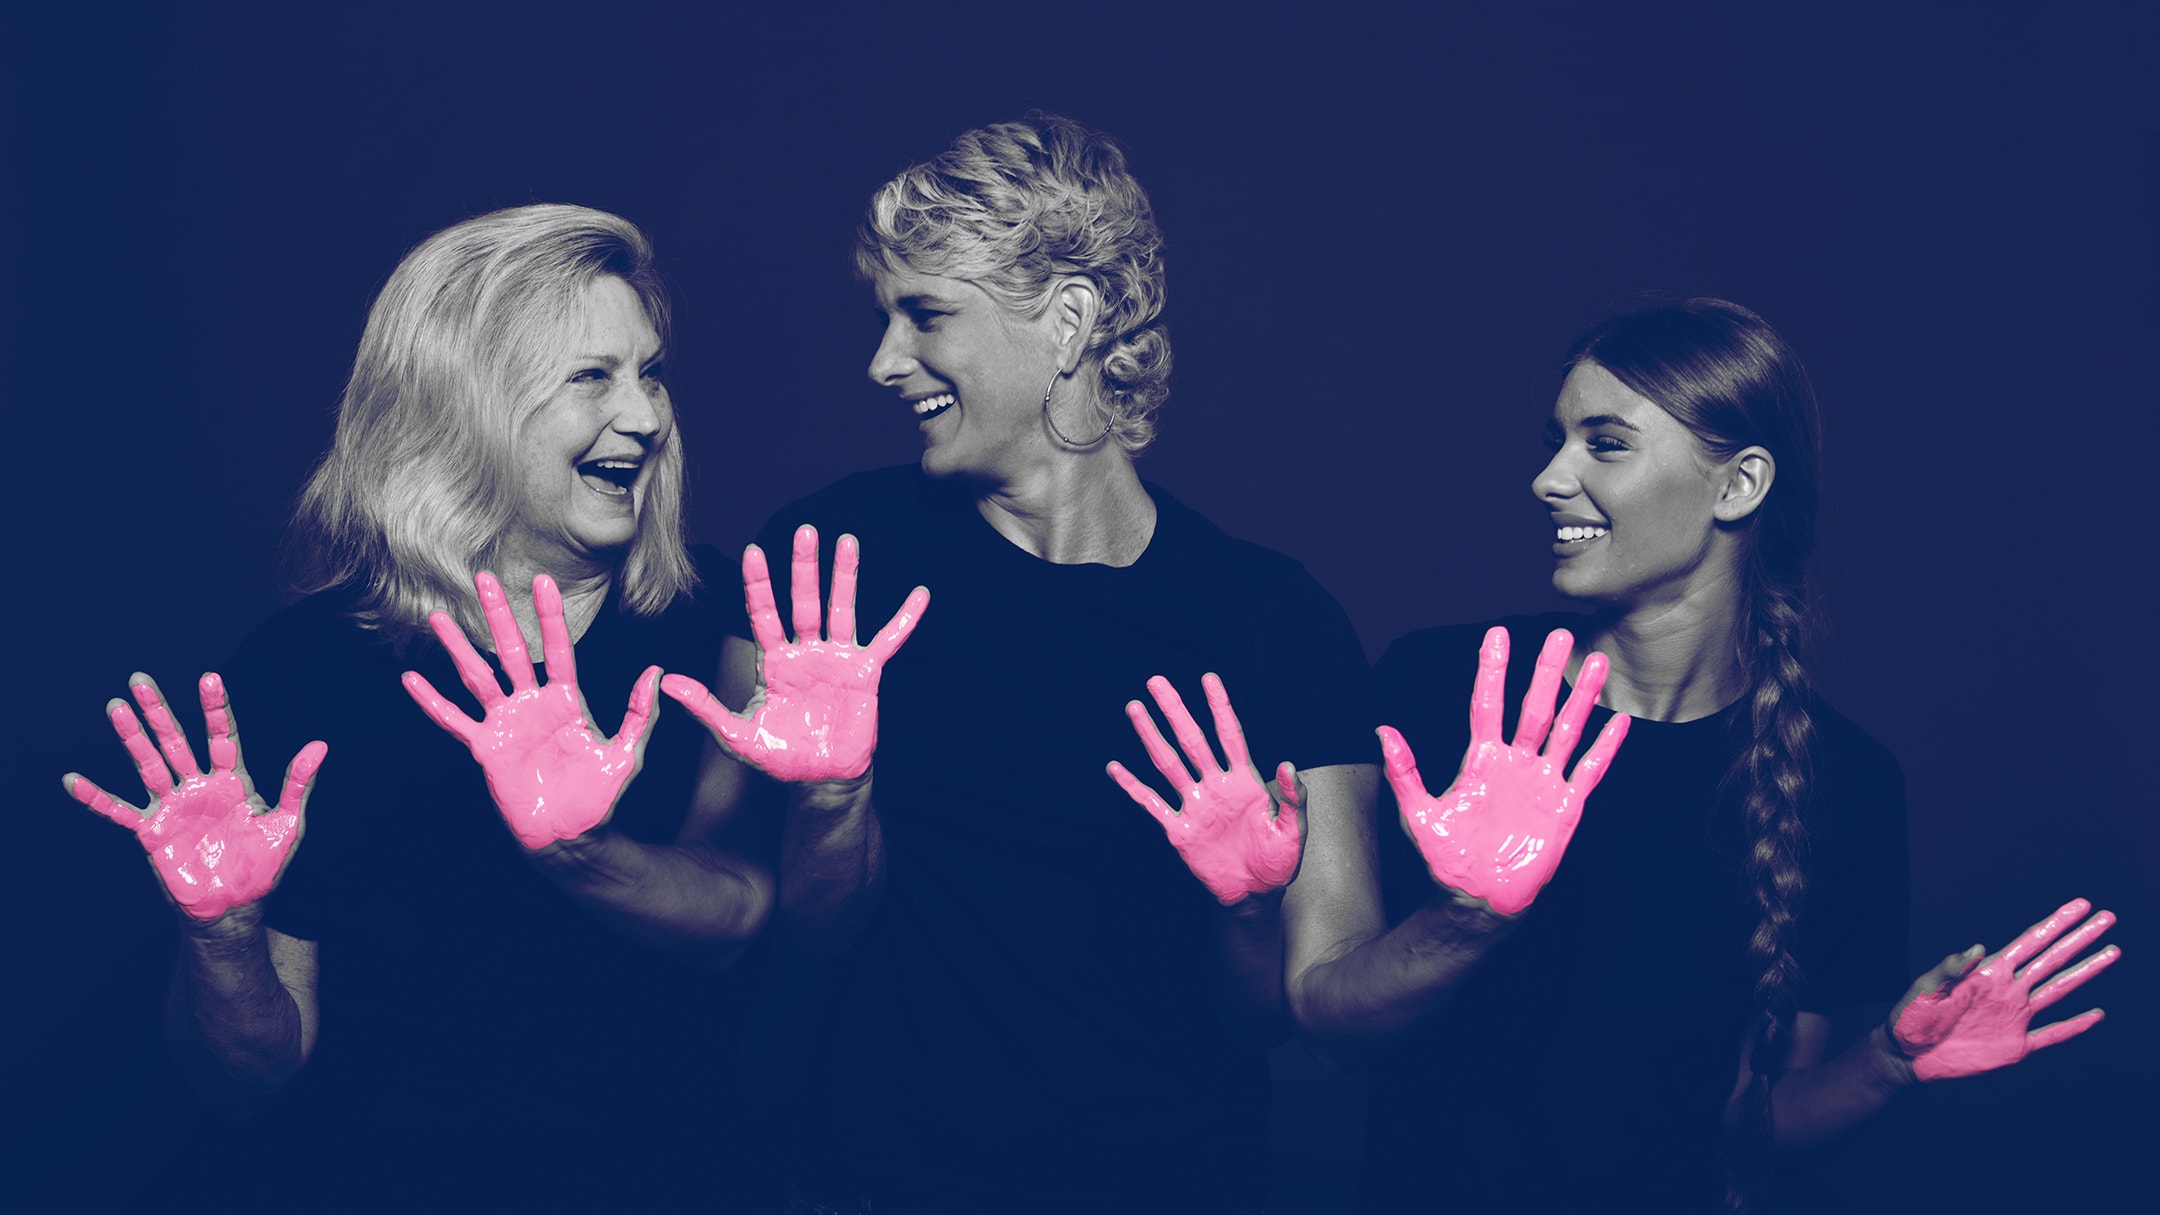 A breast cancer survivor and her family posing for the in our hands campaign with pink paint on their hands. BayCare Hospital Marketing campaign